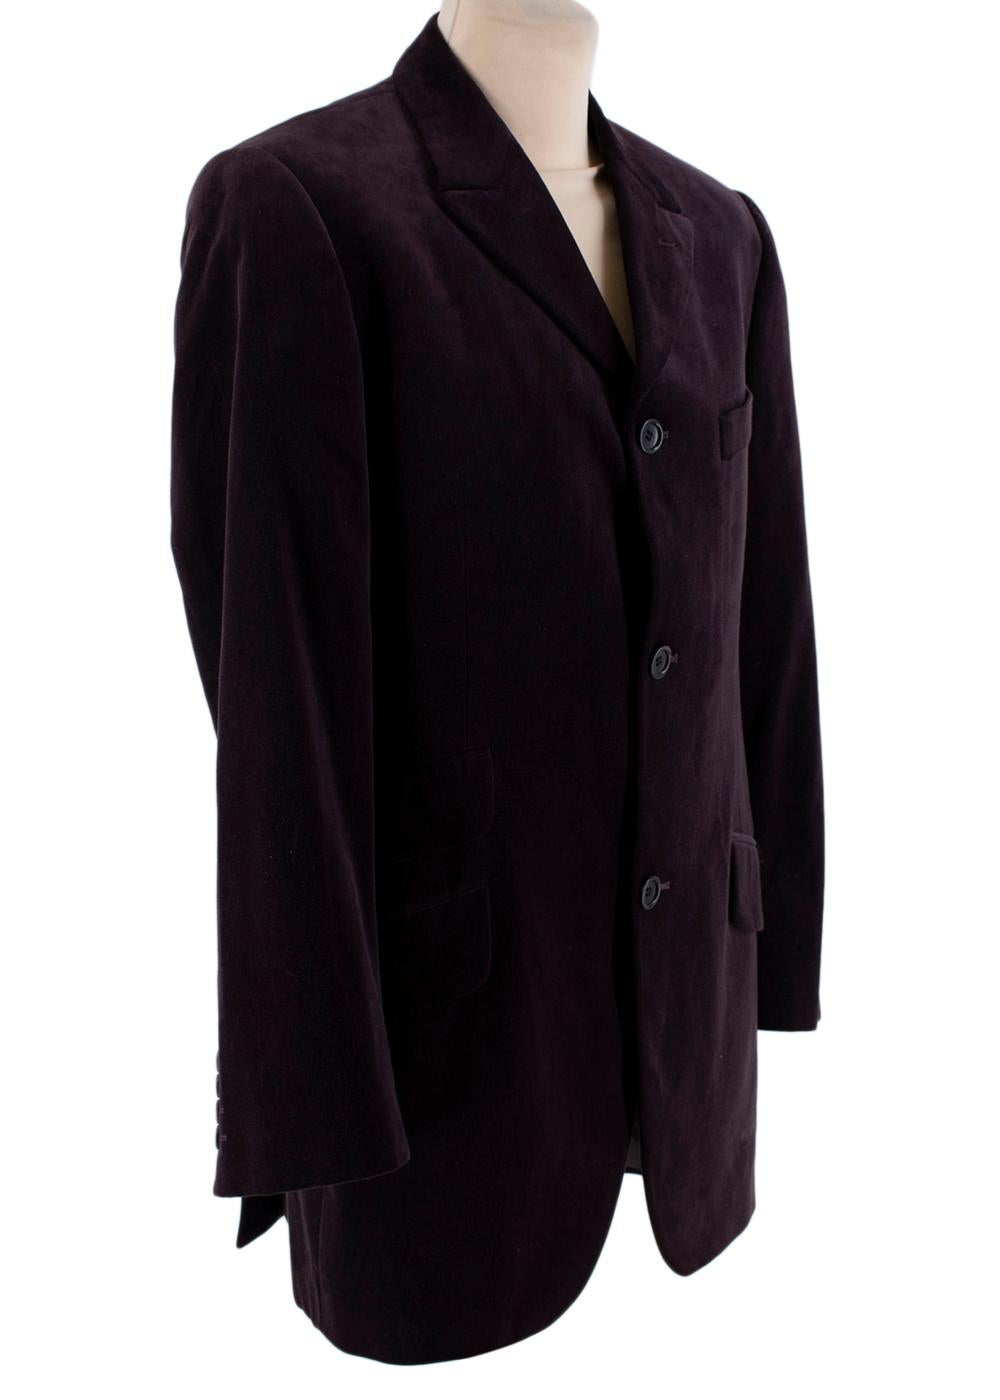 Kenzo Grape Wool Velvet Single Breasted Suit

-Made of soft wool velvet 
-Gorgeous deep grape hue 
-Classic single breasted cut 
Jacket:
-Button fastening to the front 
-Buttoned cuffs 
-Fully lined 
-4 pockets to the front 
-3 interior pockets